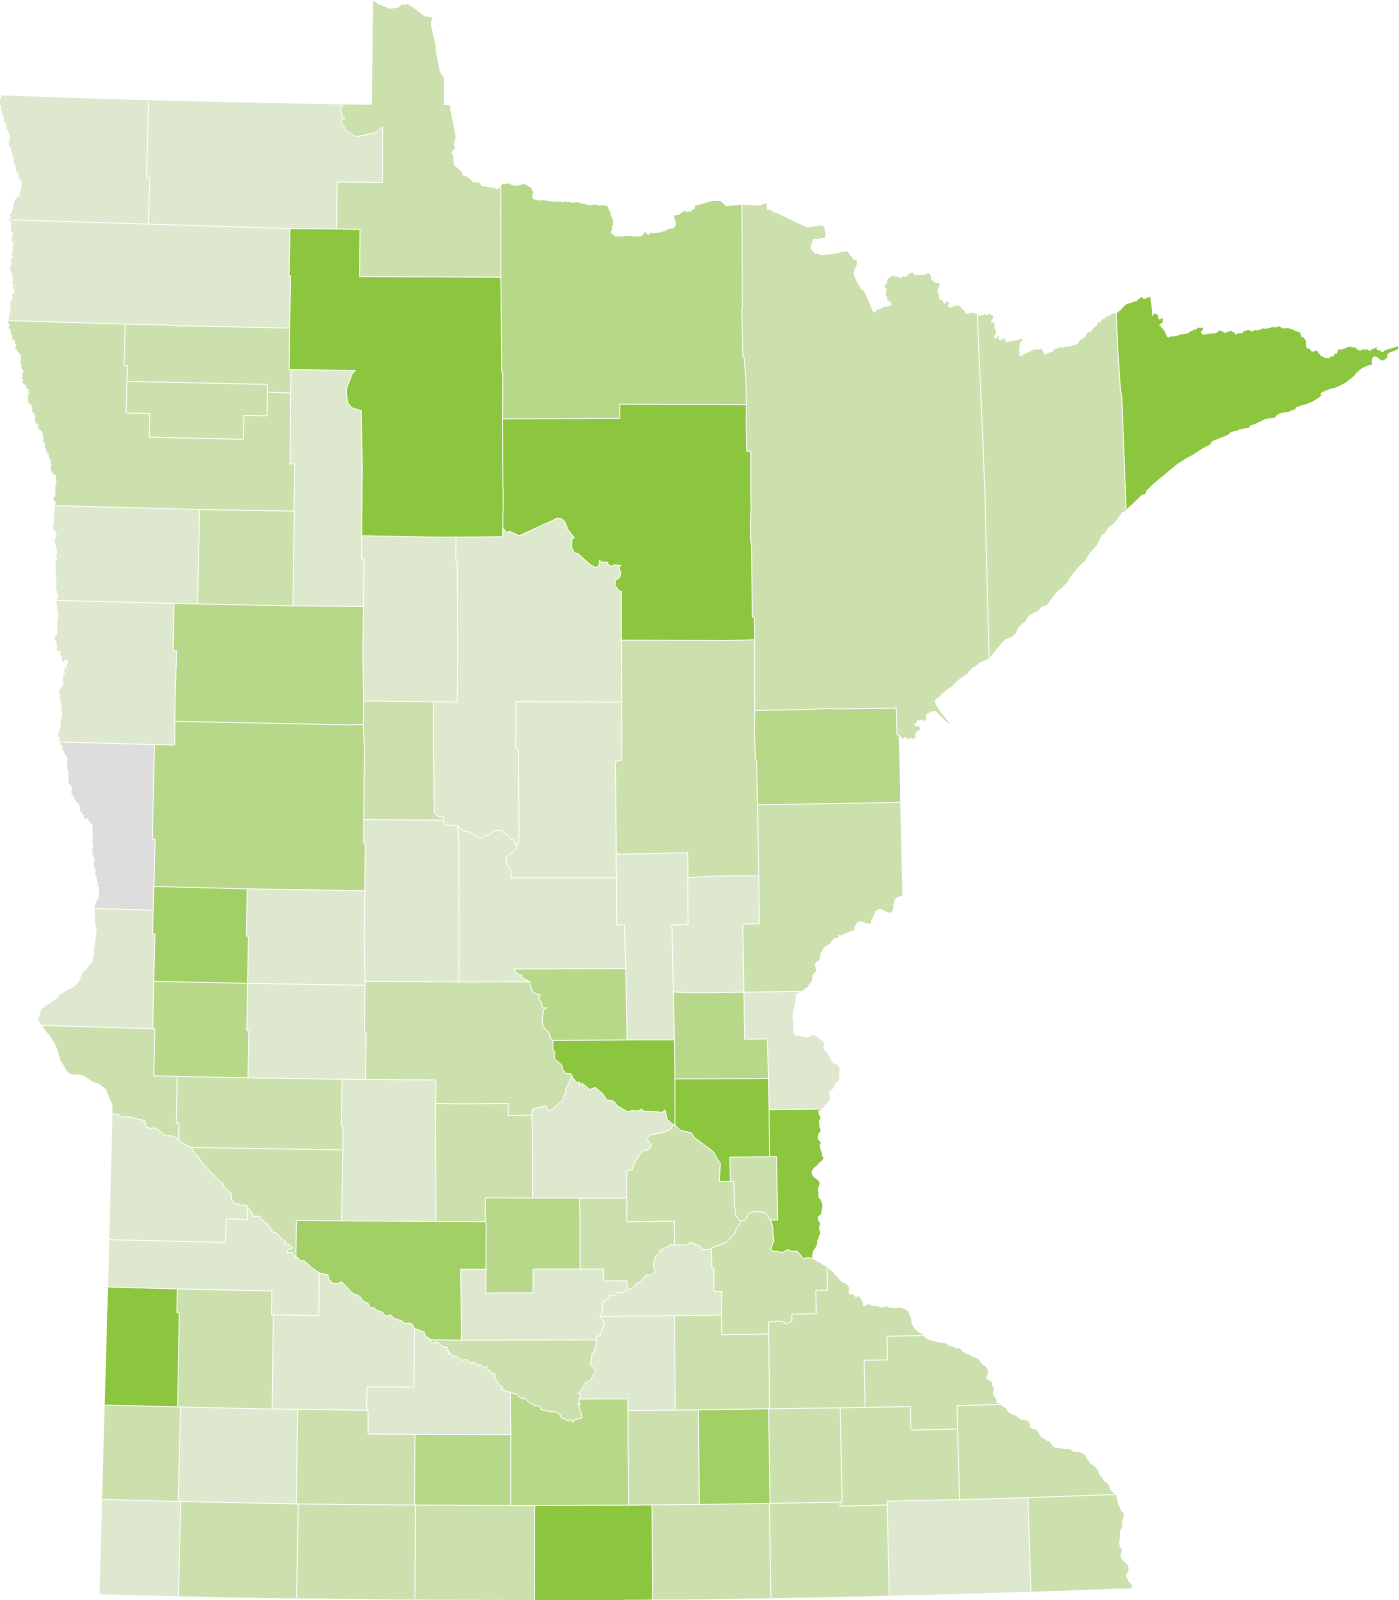 map of the state of Minnesota